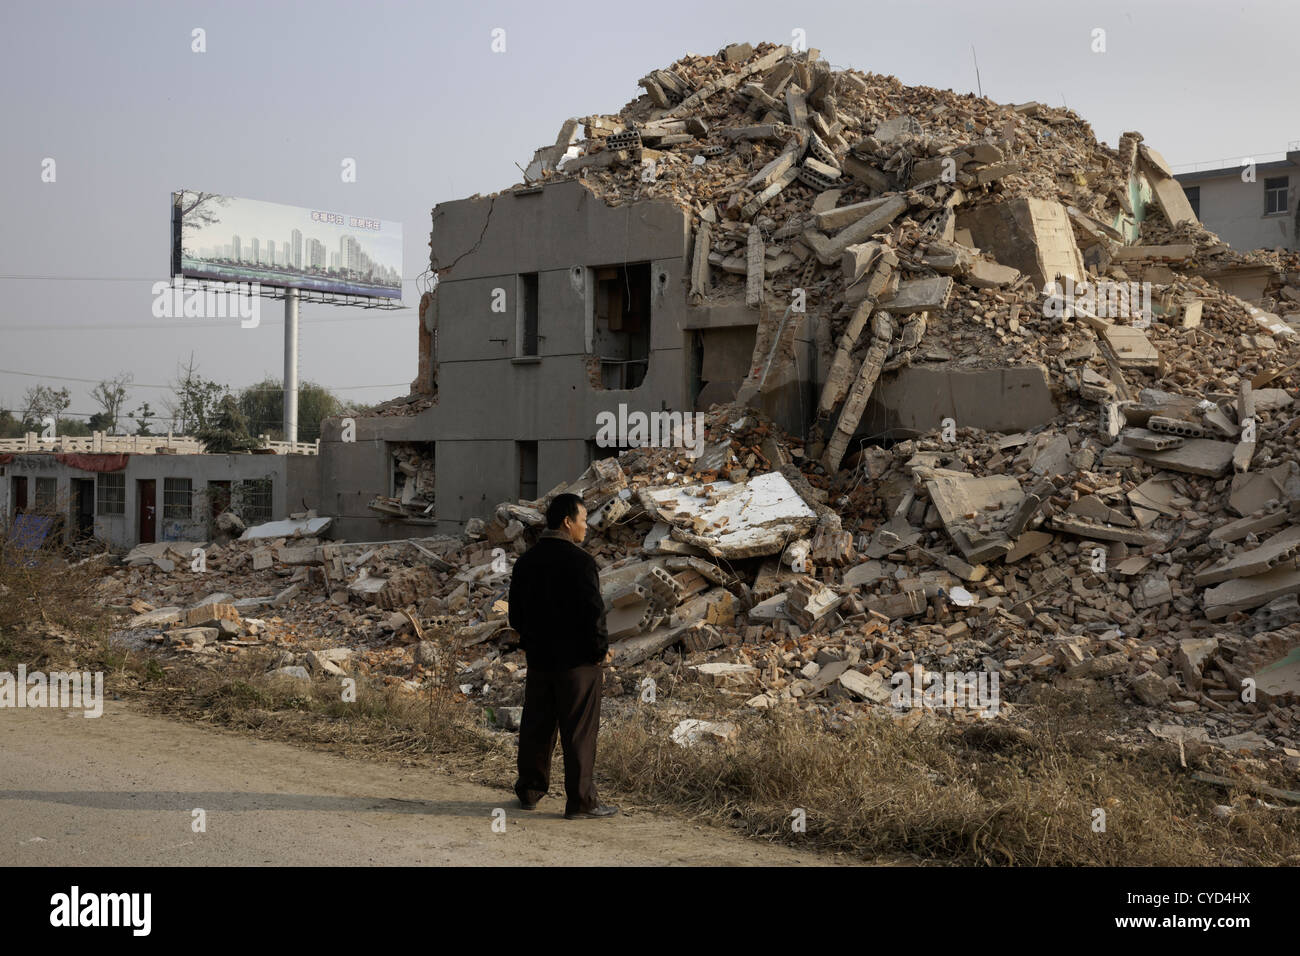 A man stands next to a building being demolished to build new construction near Taihu Lake, China. Stock Photo